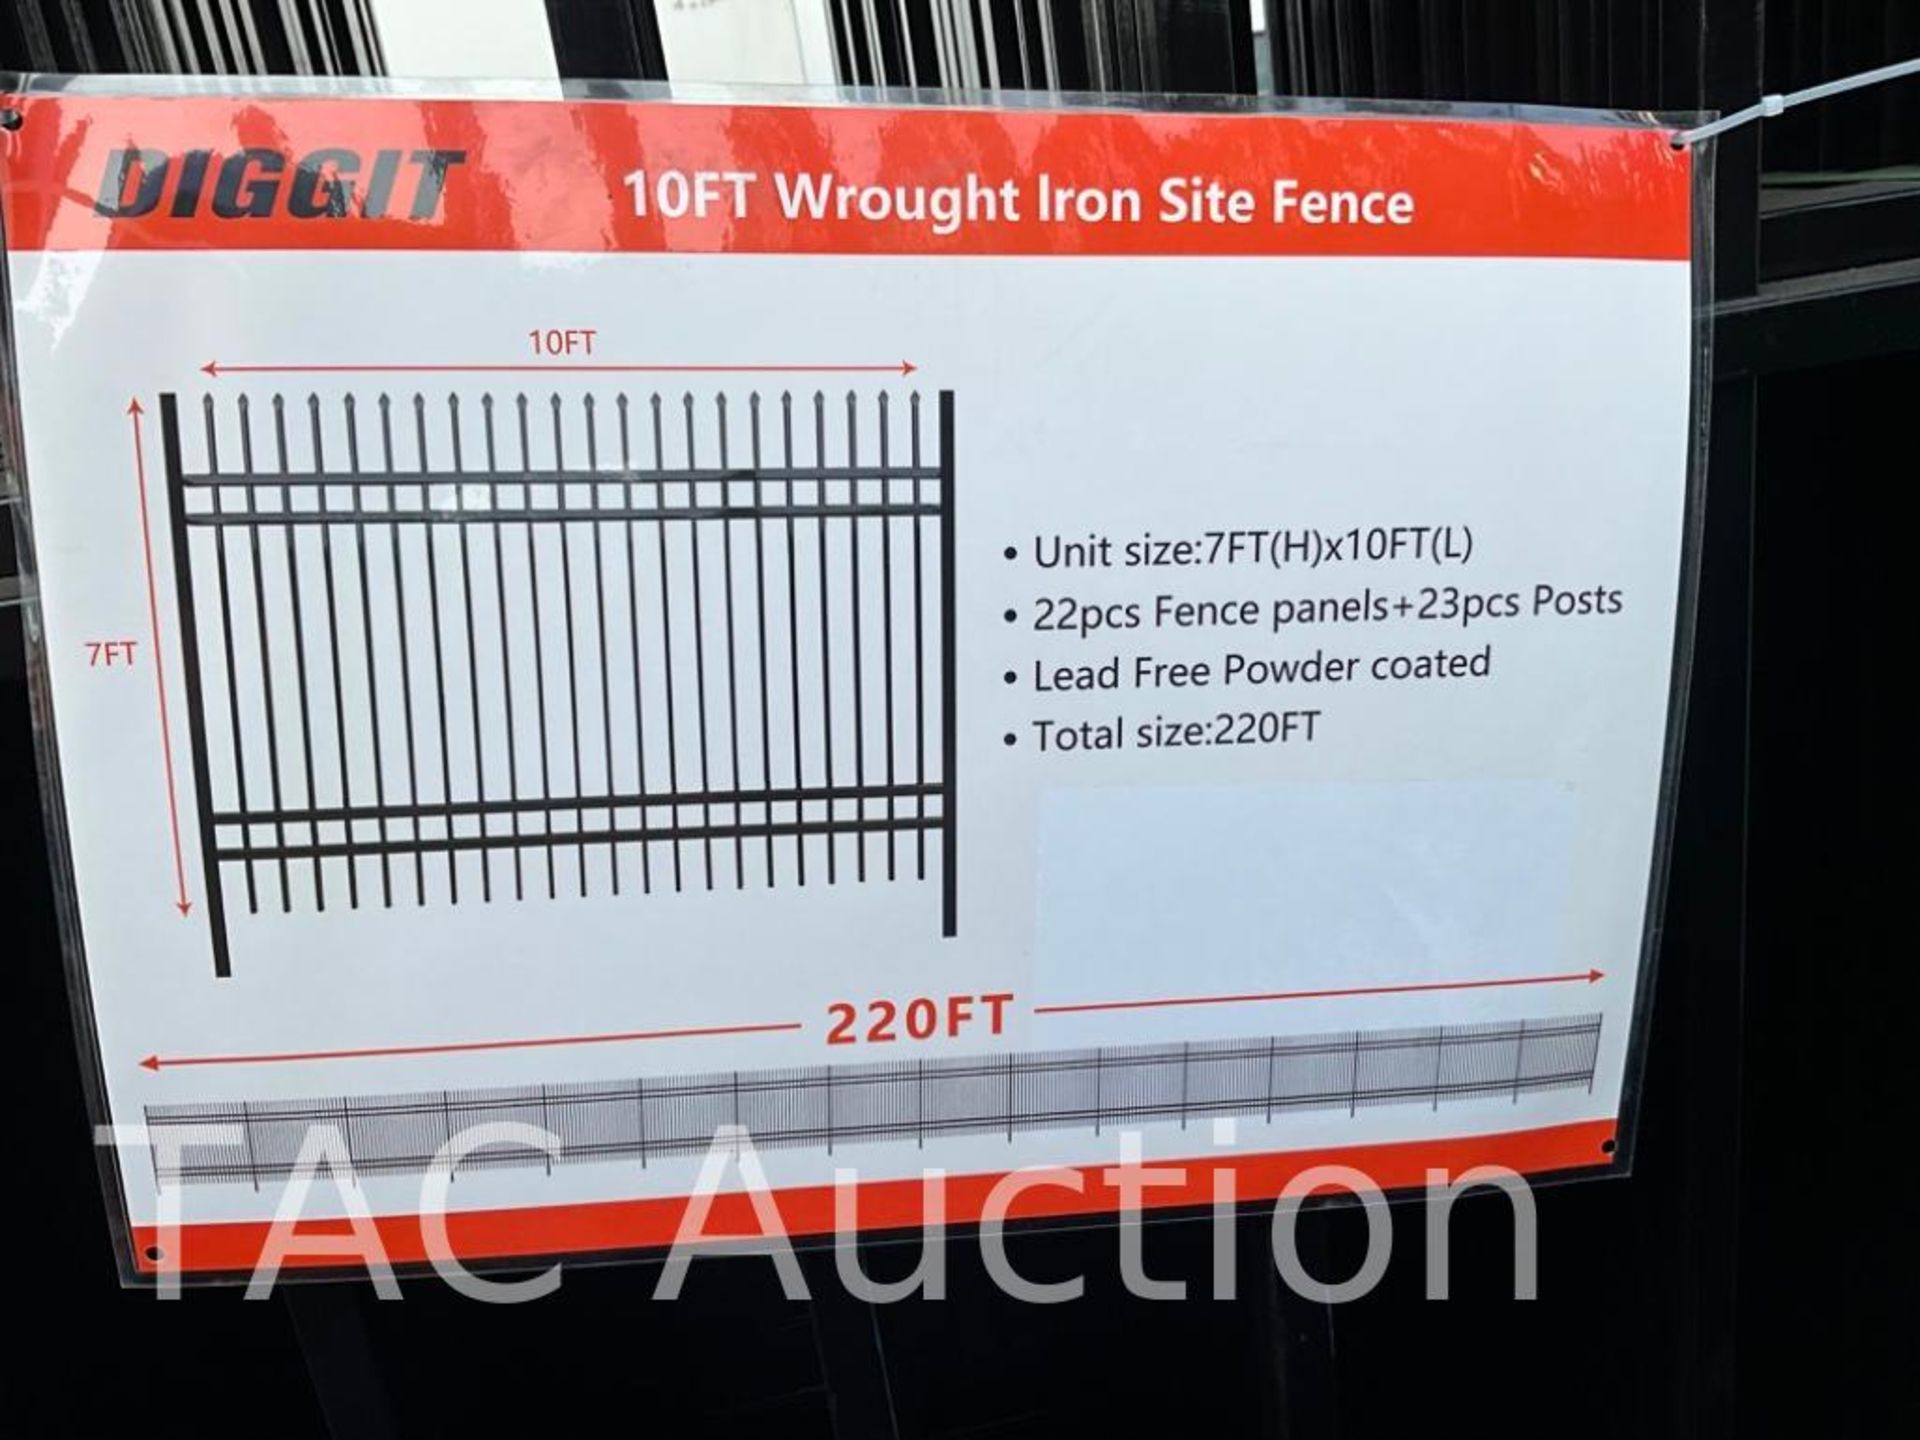 New Powder Coated Wrought Iron Fencing - Image 10 of 11